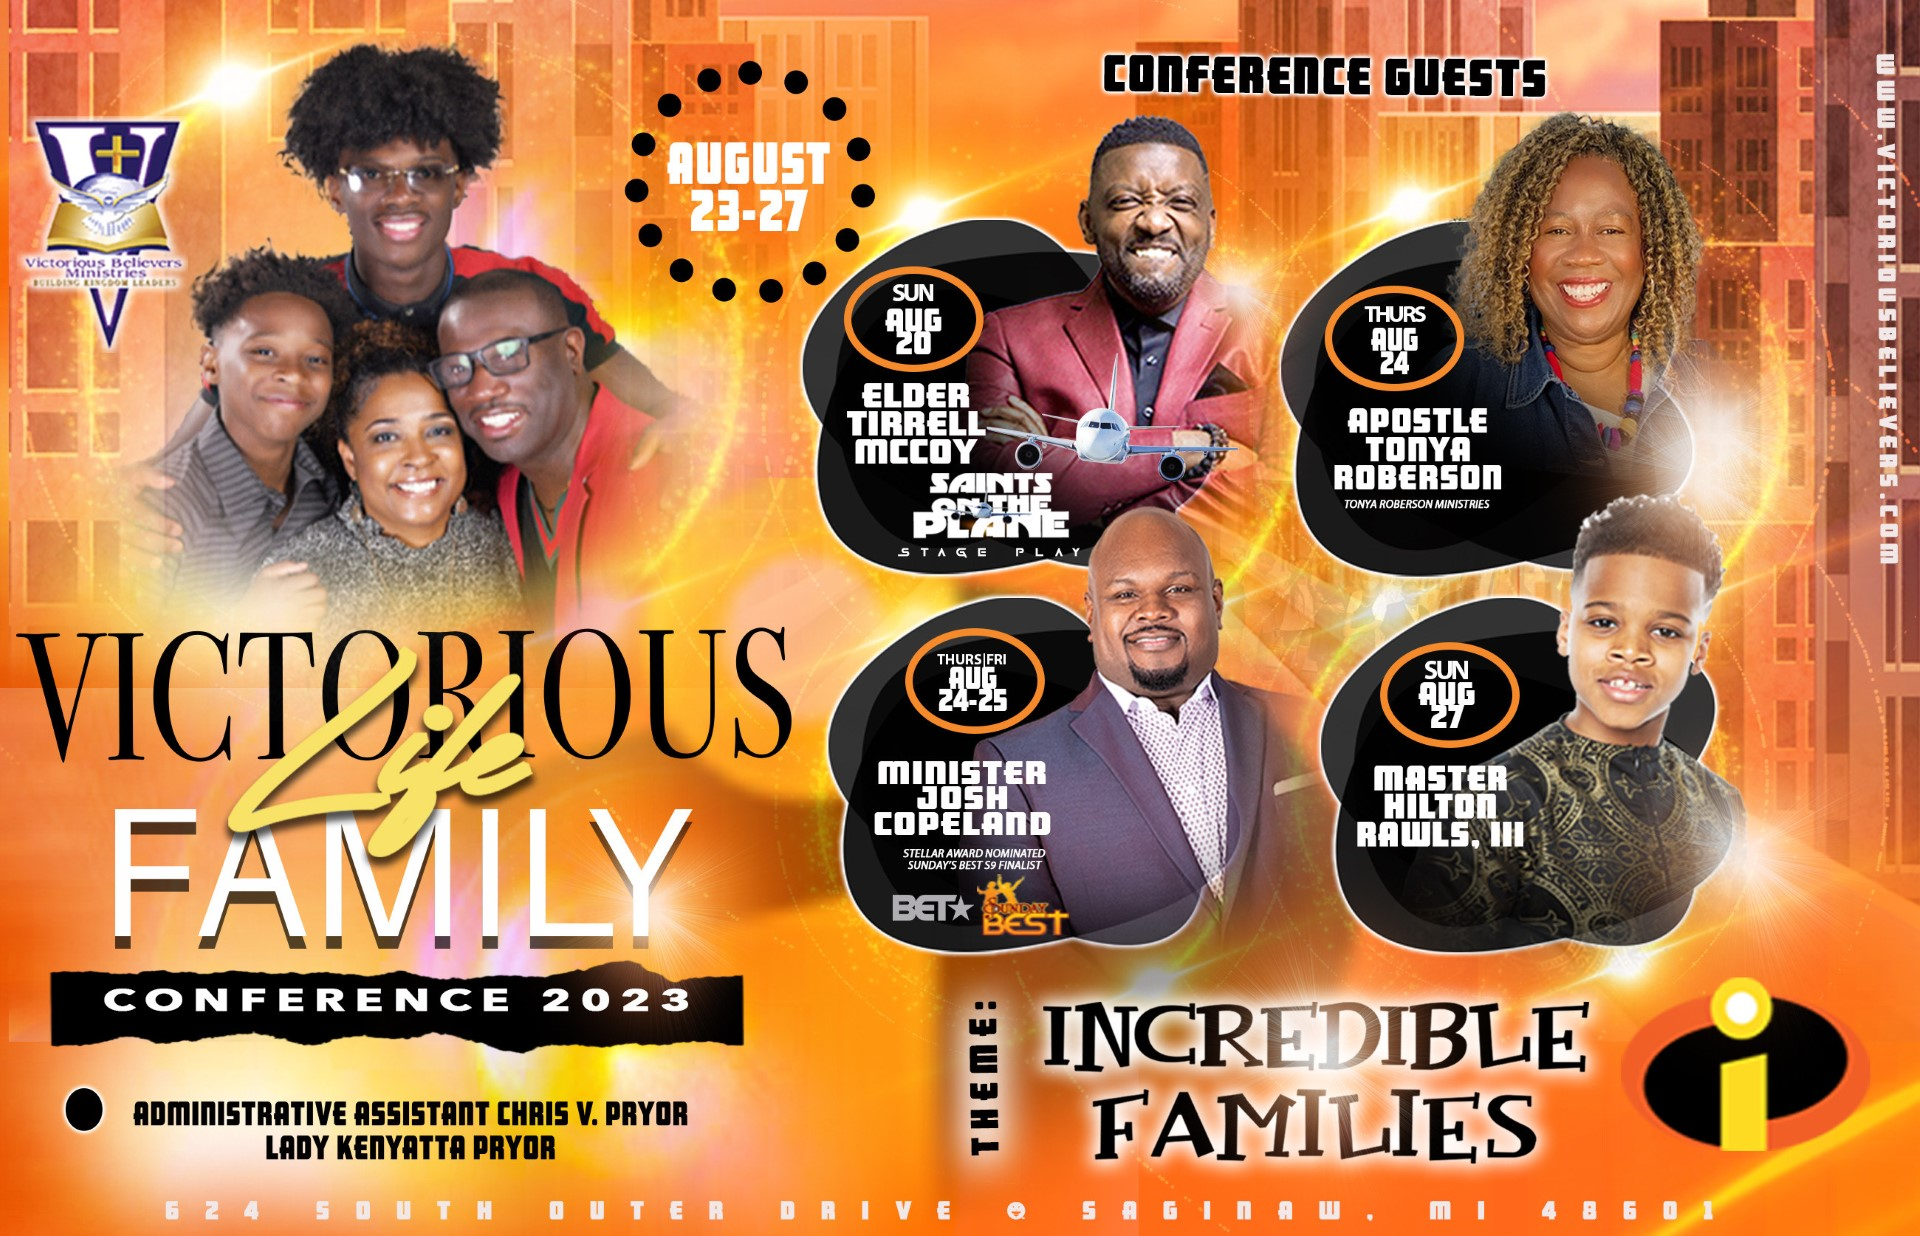 <h1 class="tribe-events-single-event-title">Victorious Family Life Conference 2023</h1>